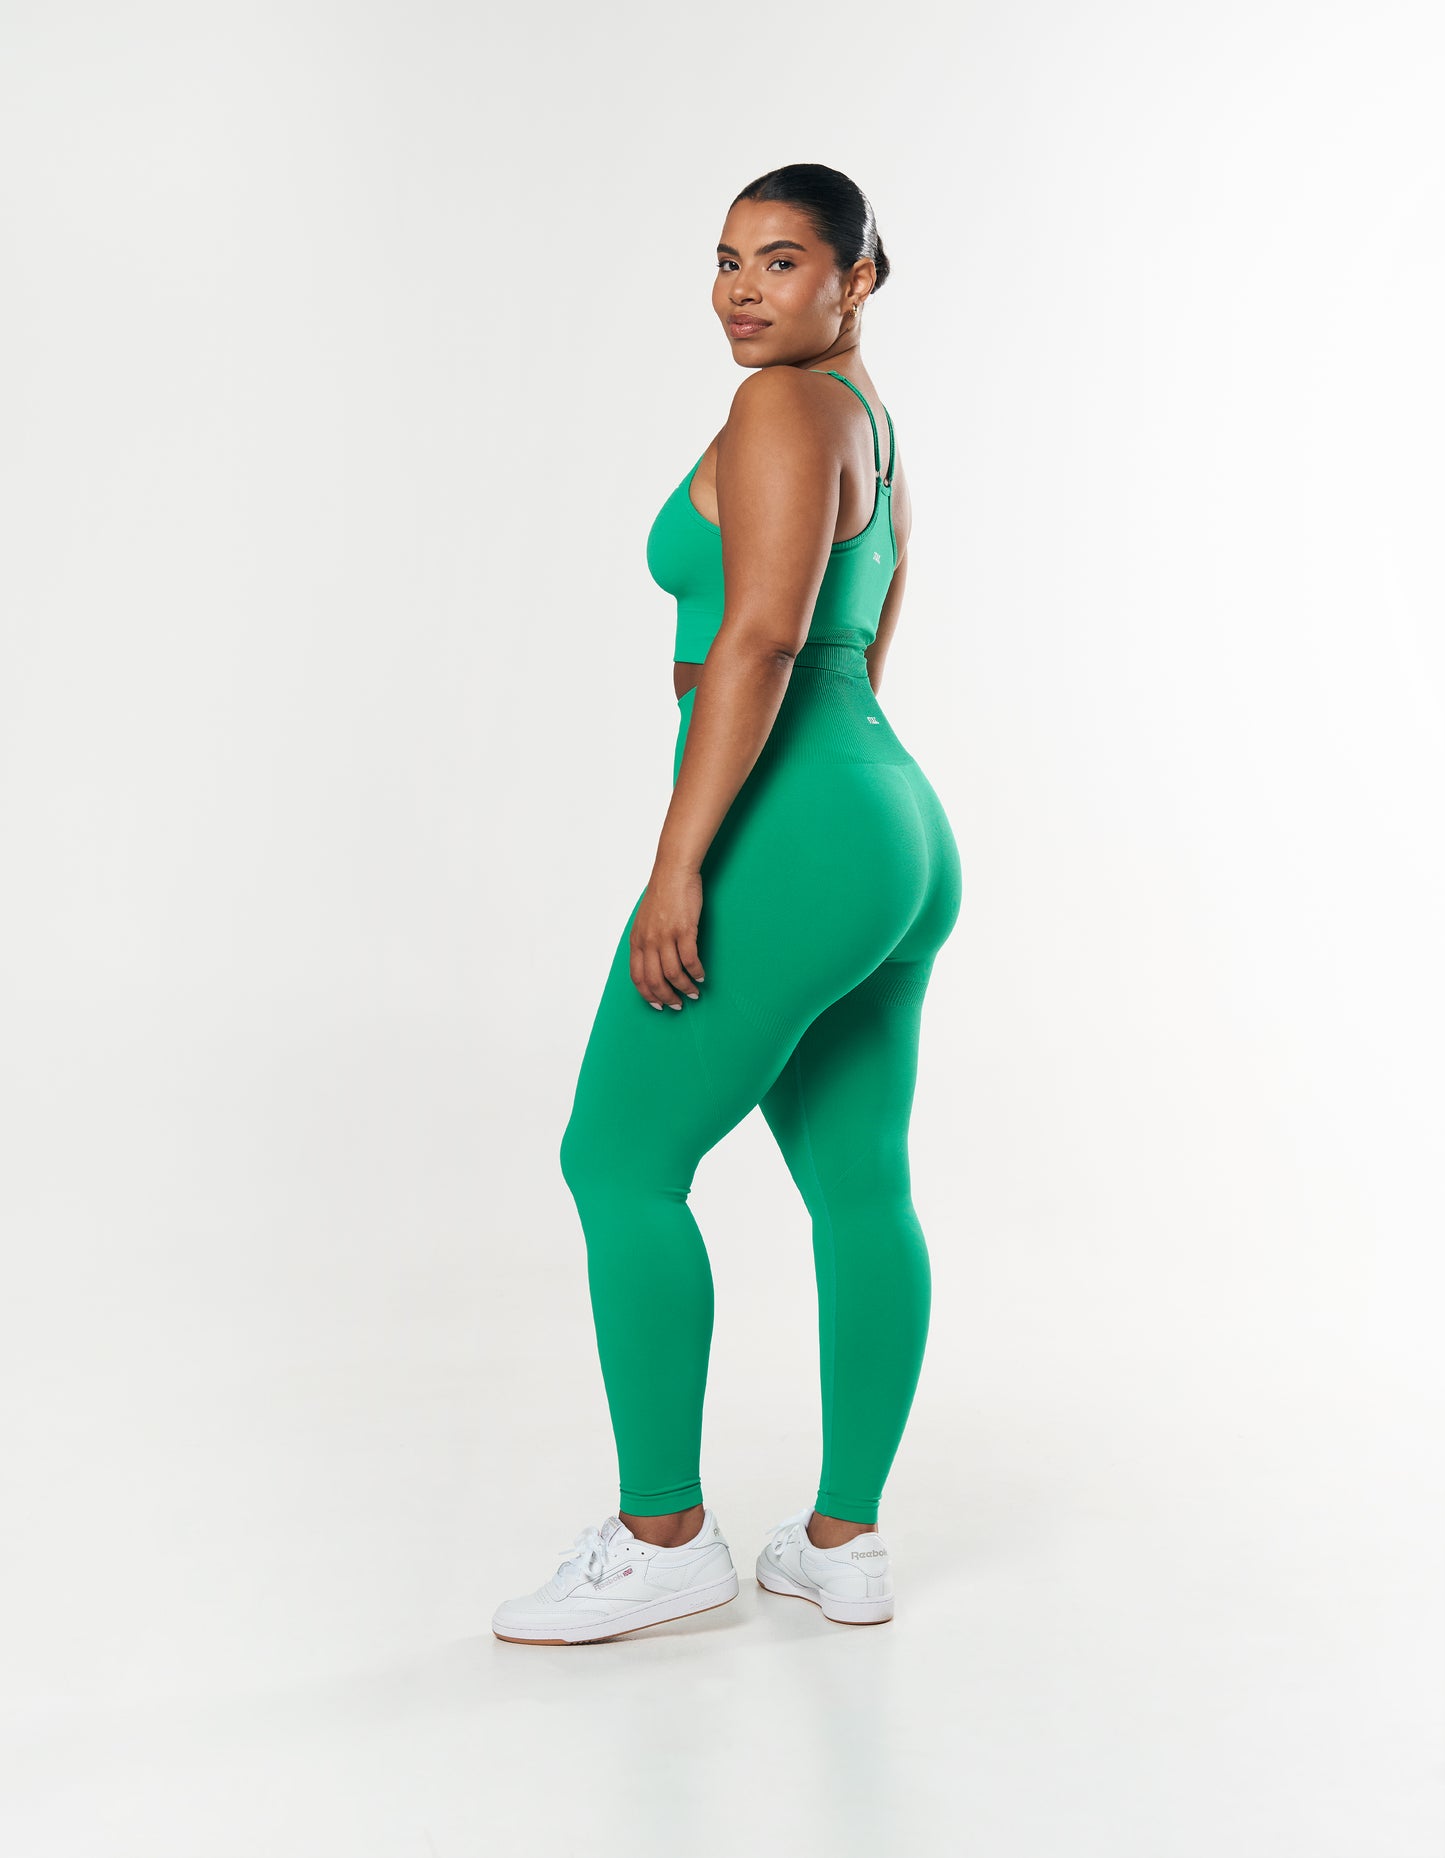 STAX. PS Strappy Crop - Green